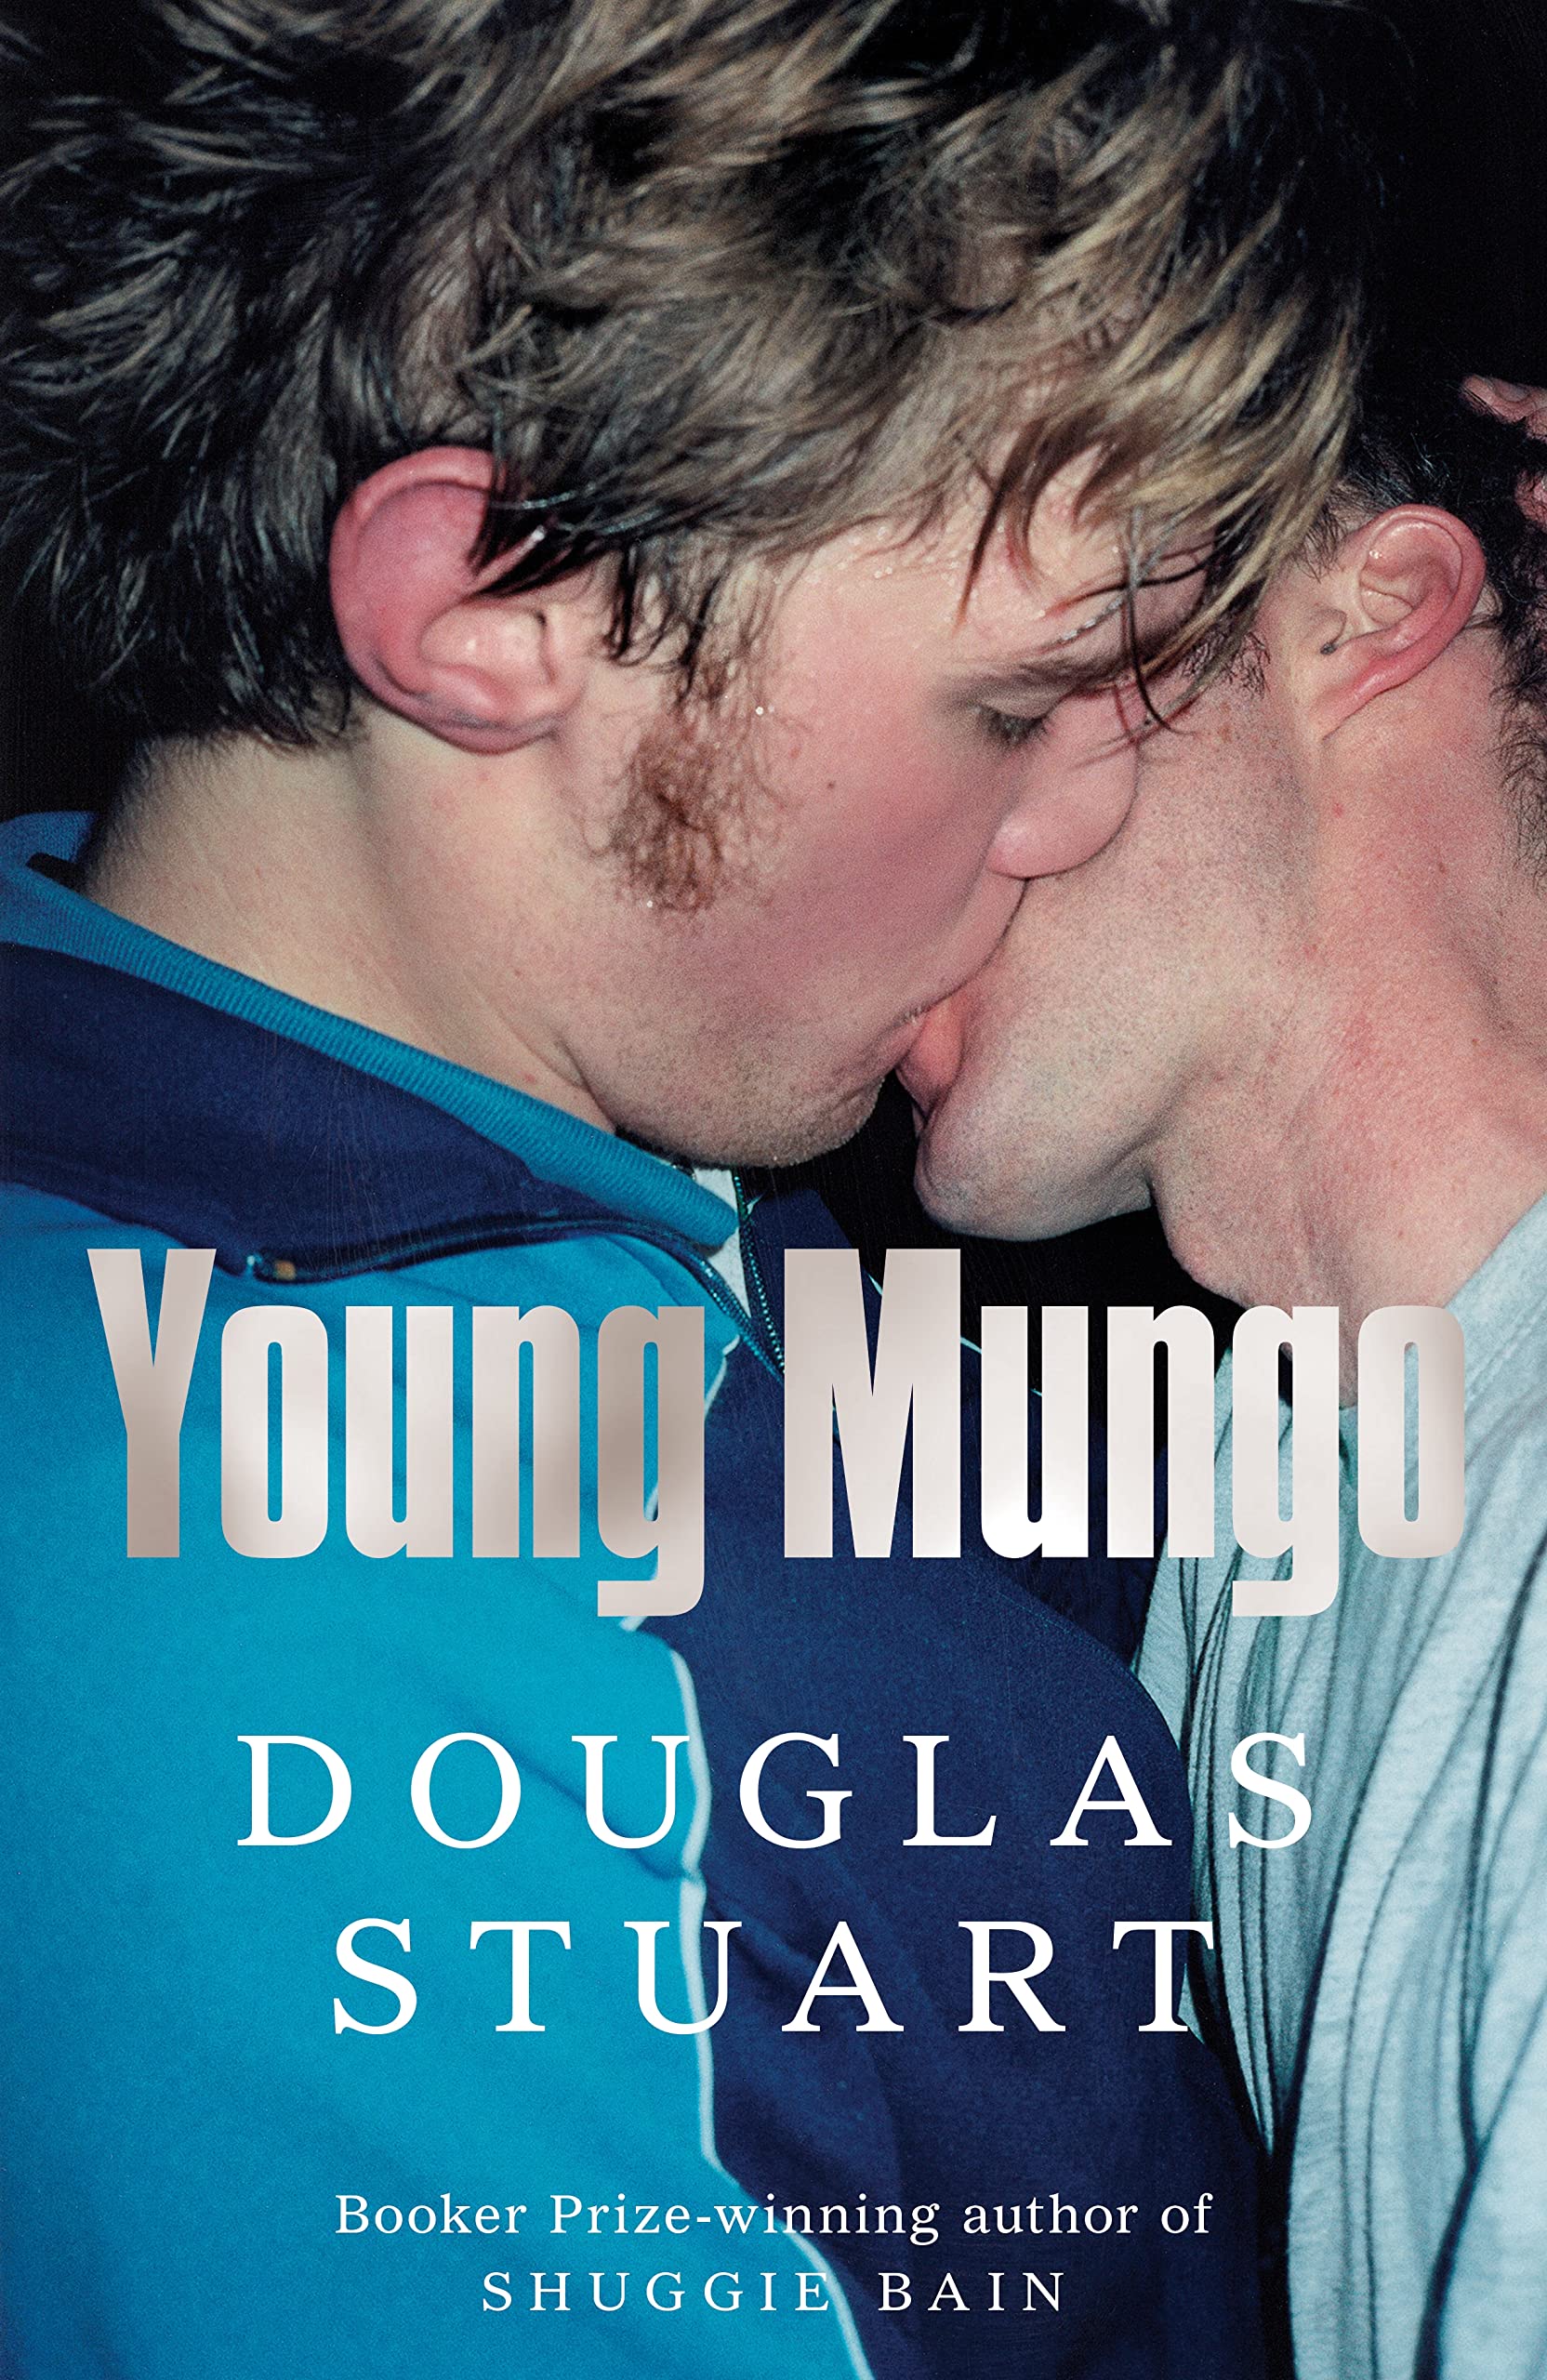 Young Mungo by Douglas Stuart book cover of two men kissing. 